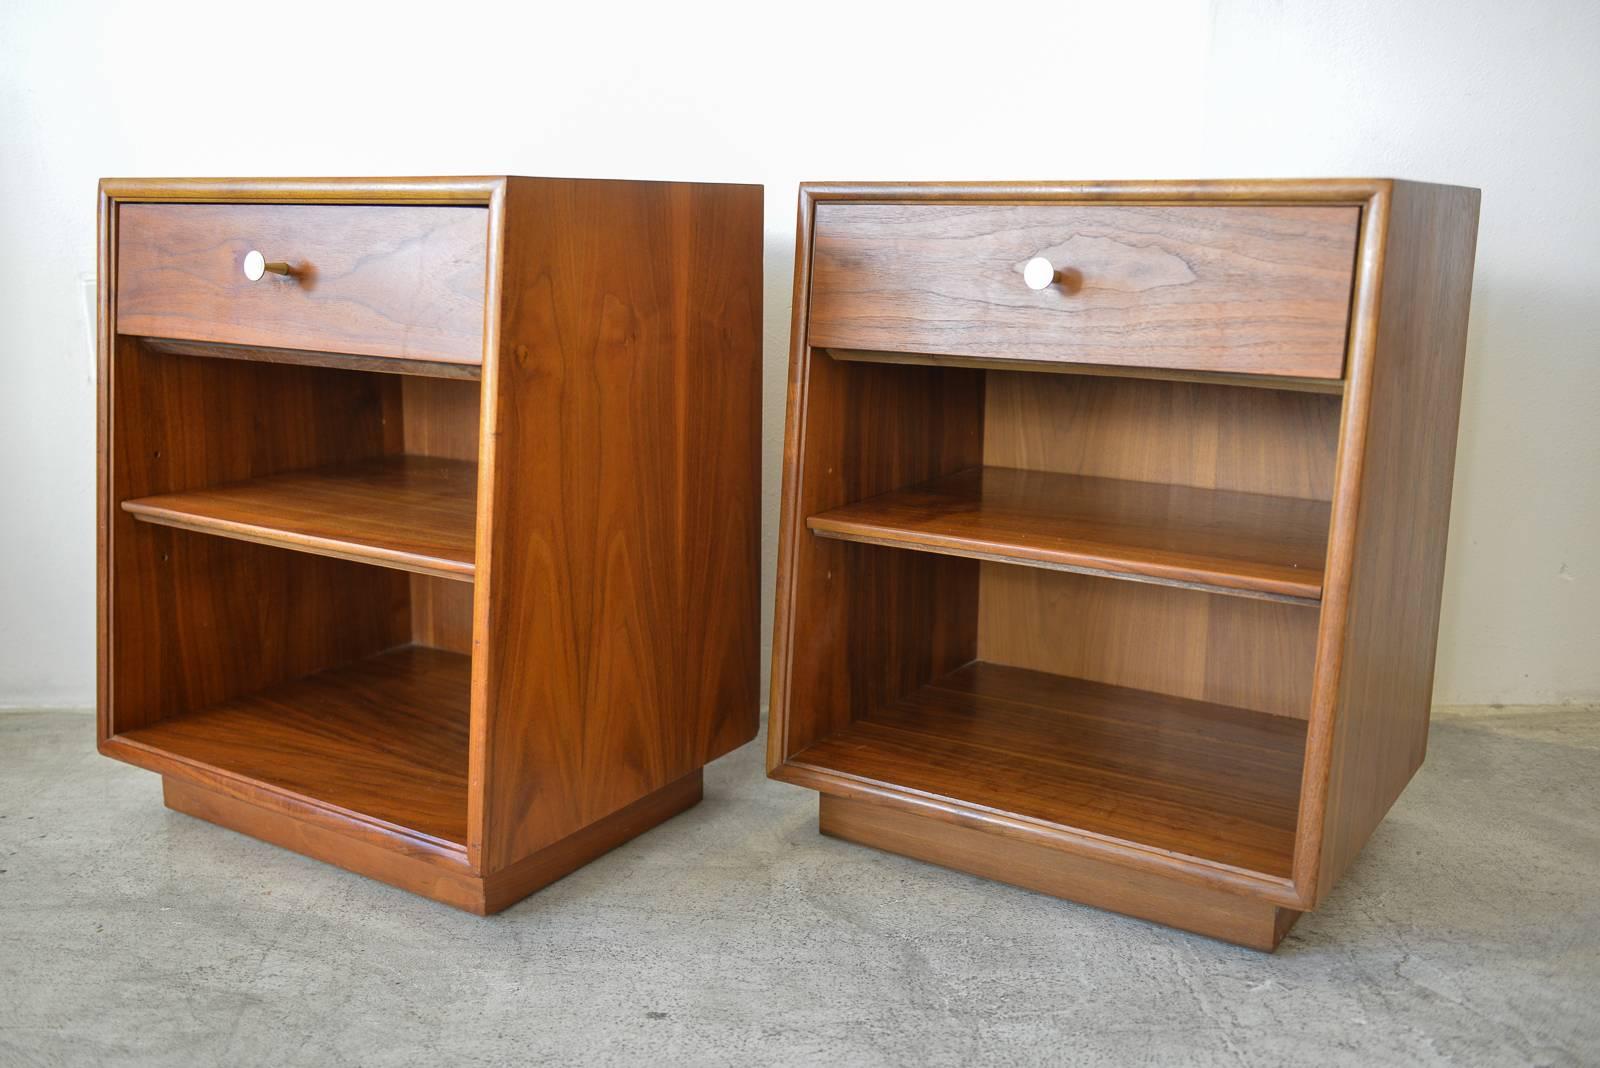 Pair of Kipp Stewart for Drexel walnut nightstands, circa 1965. Excellent original condition with brass hardware and adjustable inner shelf. Sold as a pair only.

Measures: 24